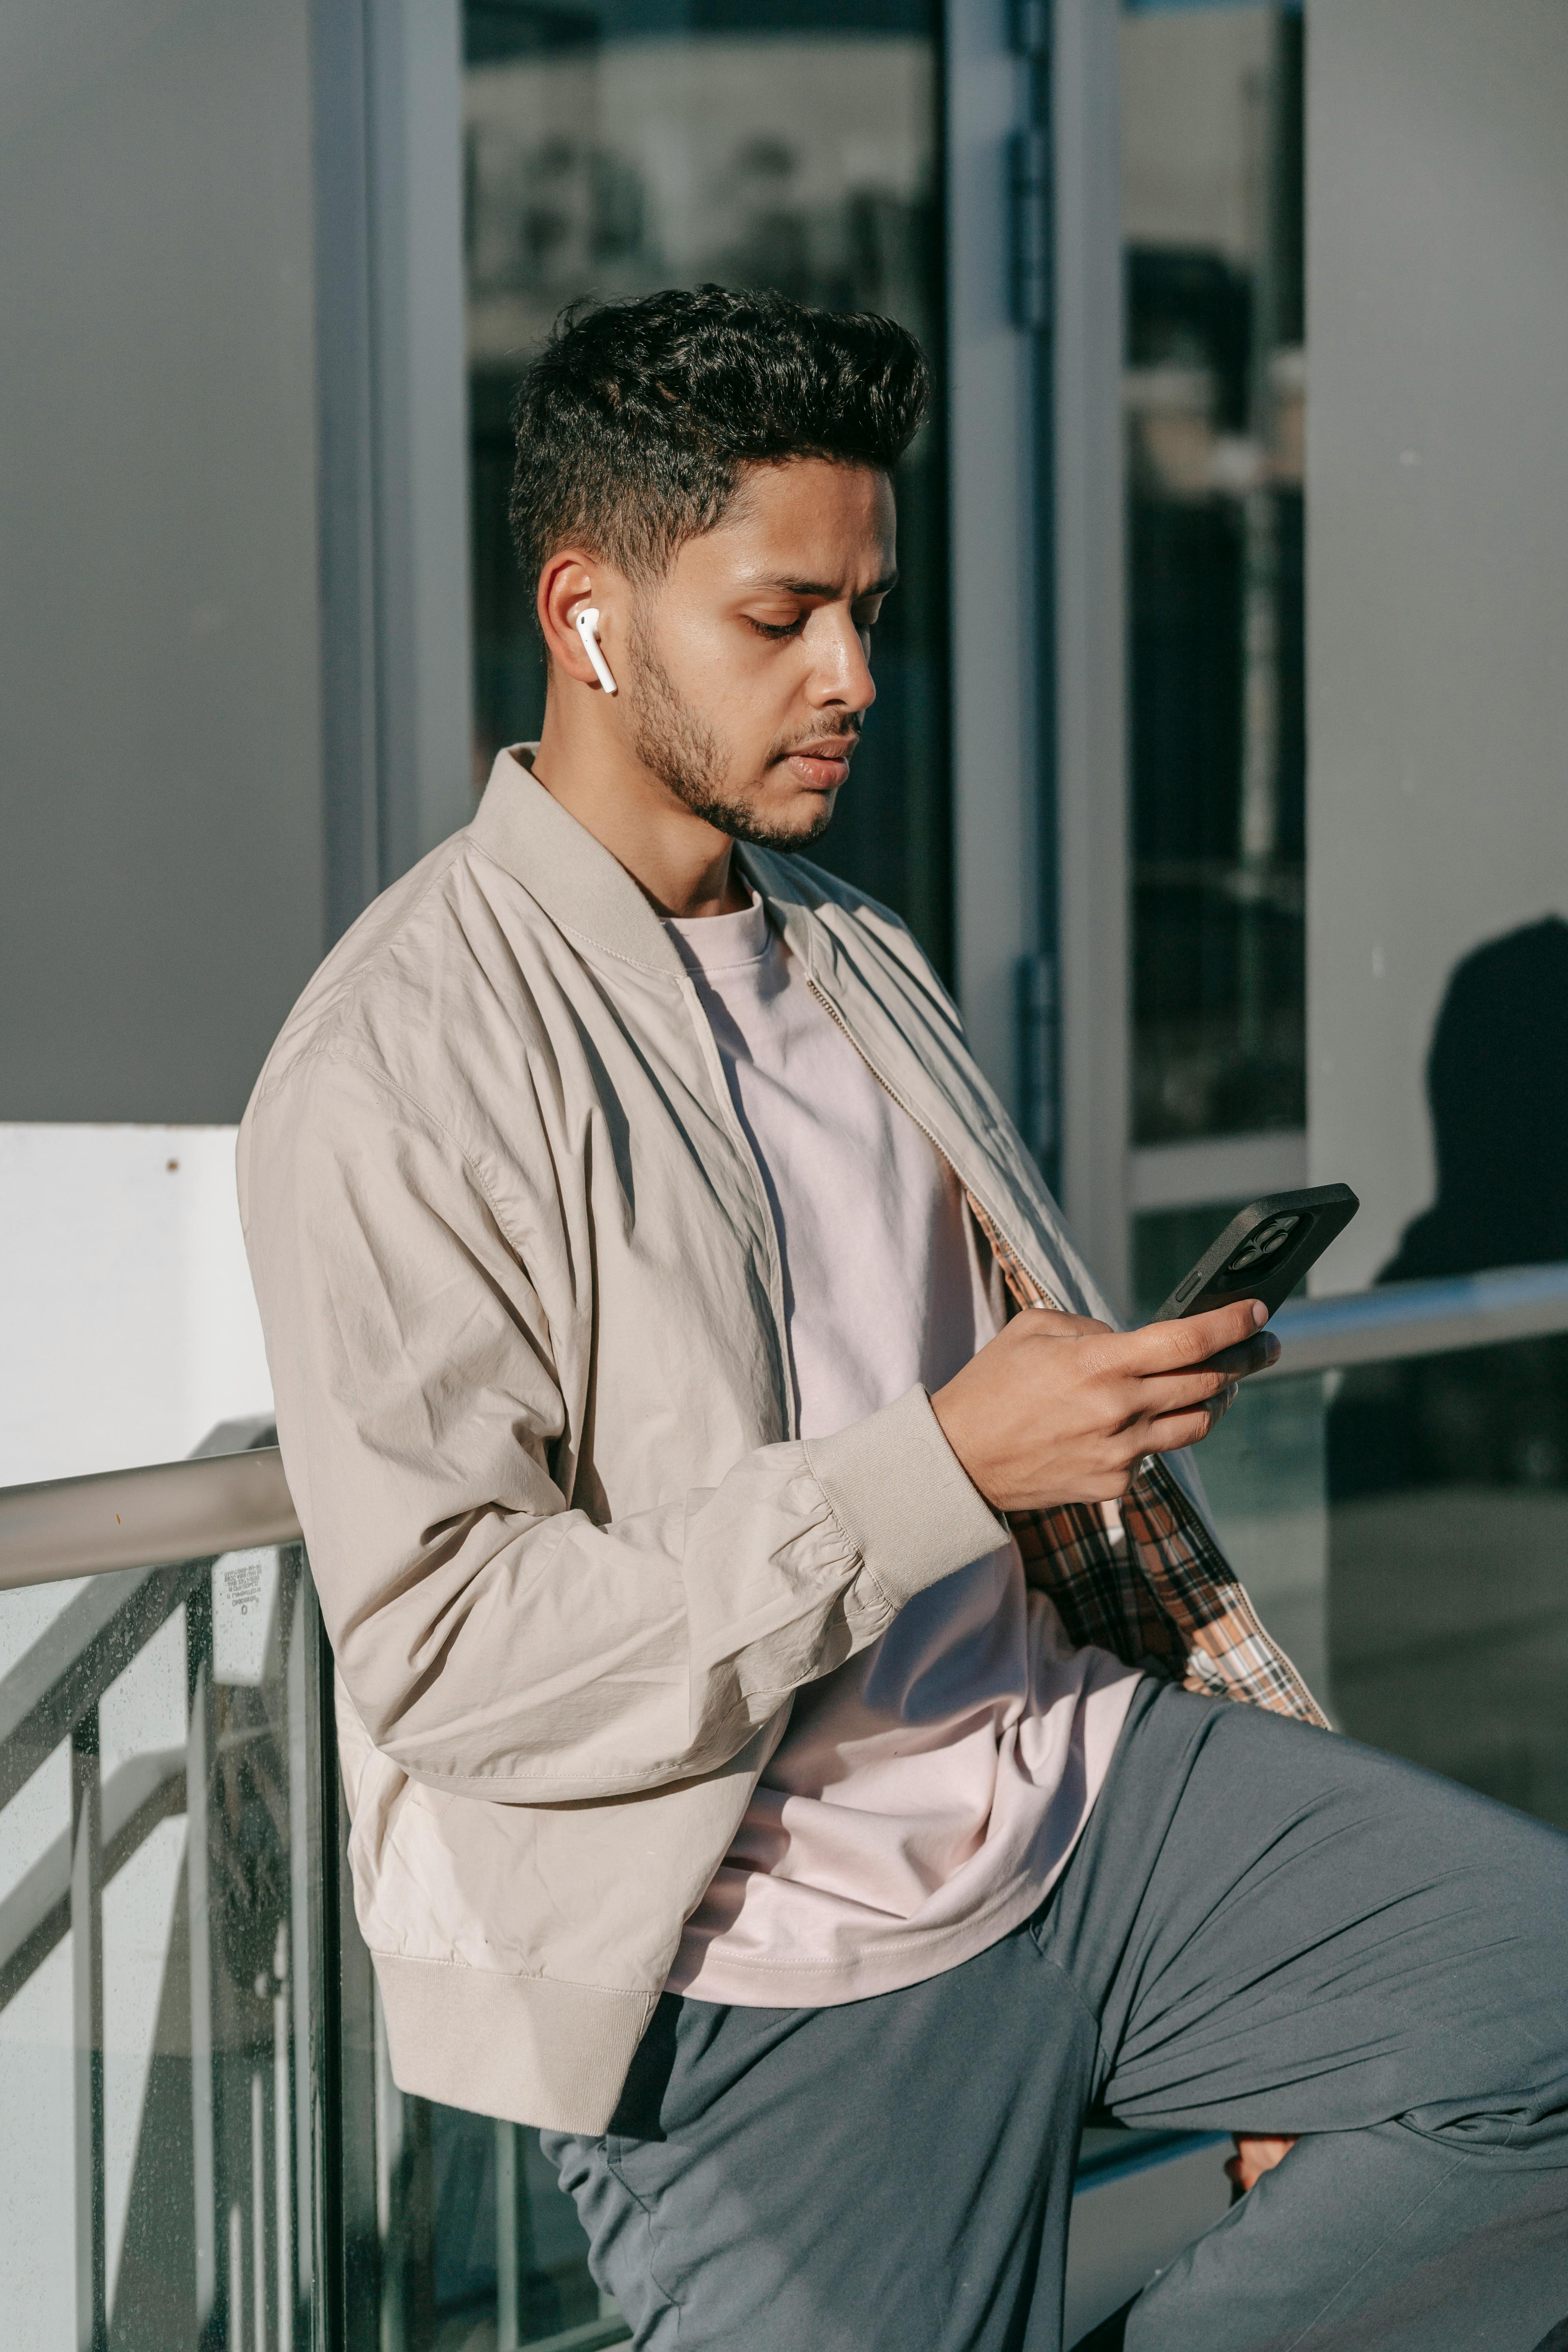 A young man speaking on his phone using ear pods | Source: Pexels